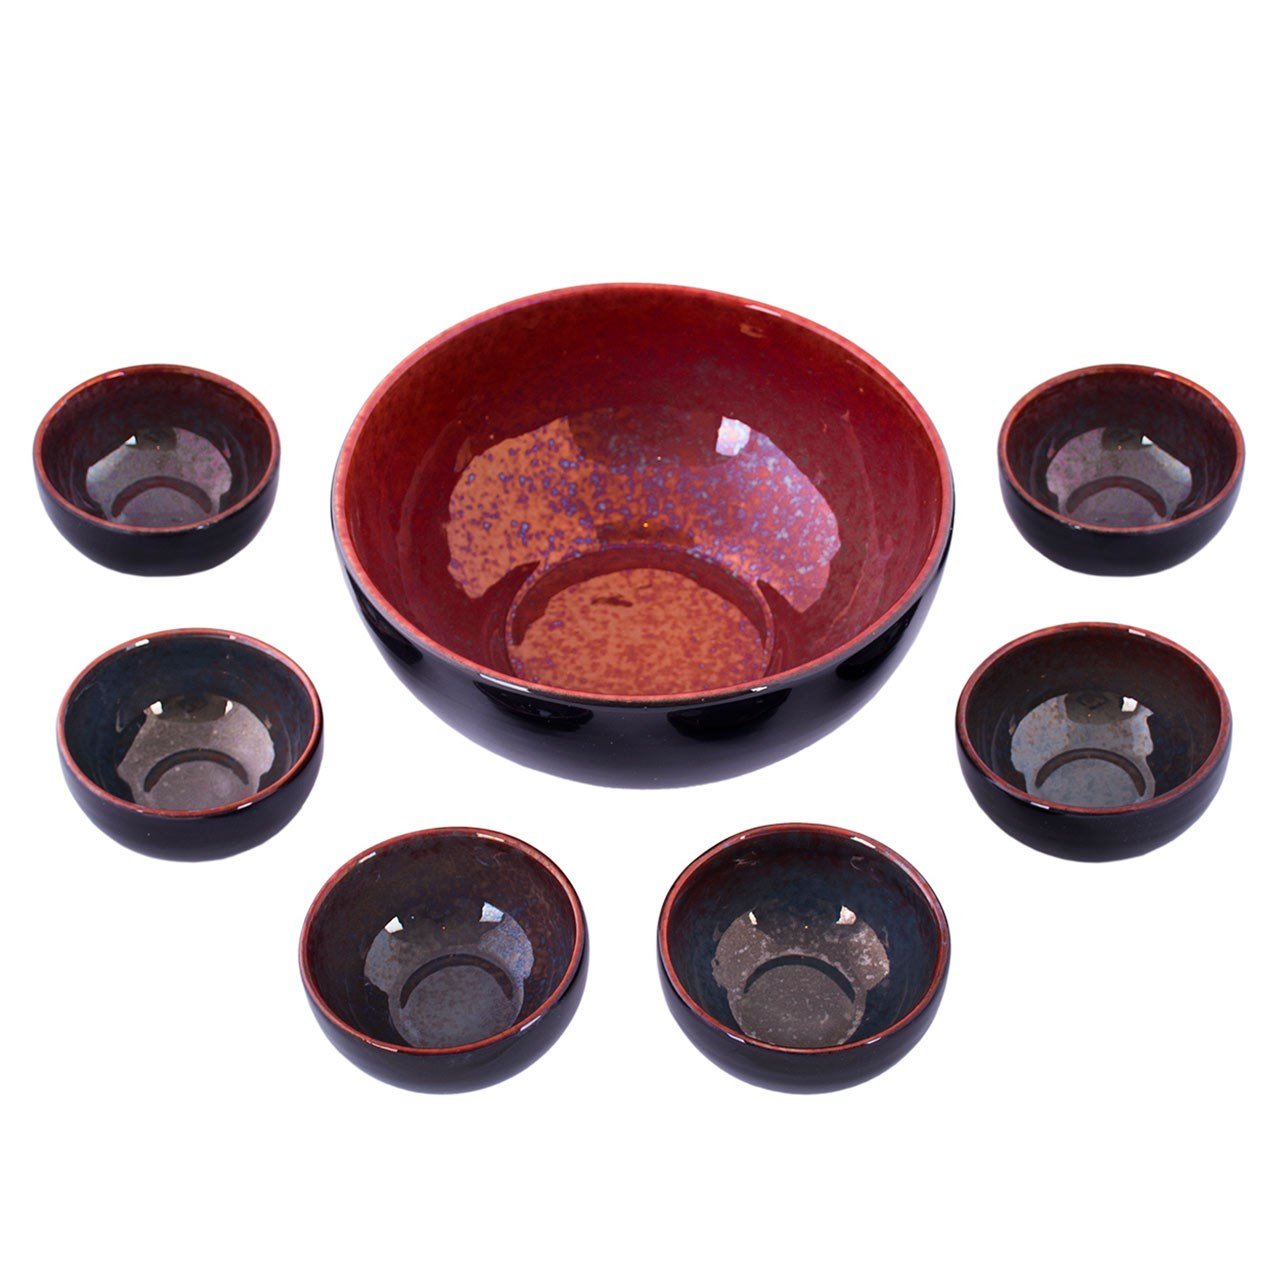 Handmade Pottery bowl dayere model Collection 7 pcs,Handmade Pottery bowl,pottery stuff,pottery containers